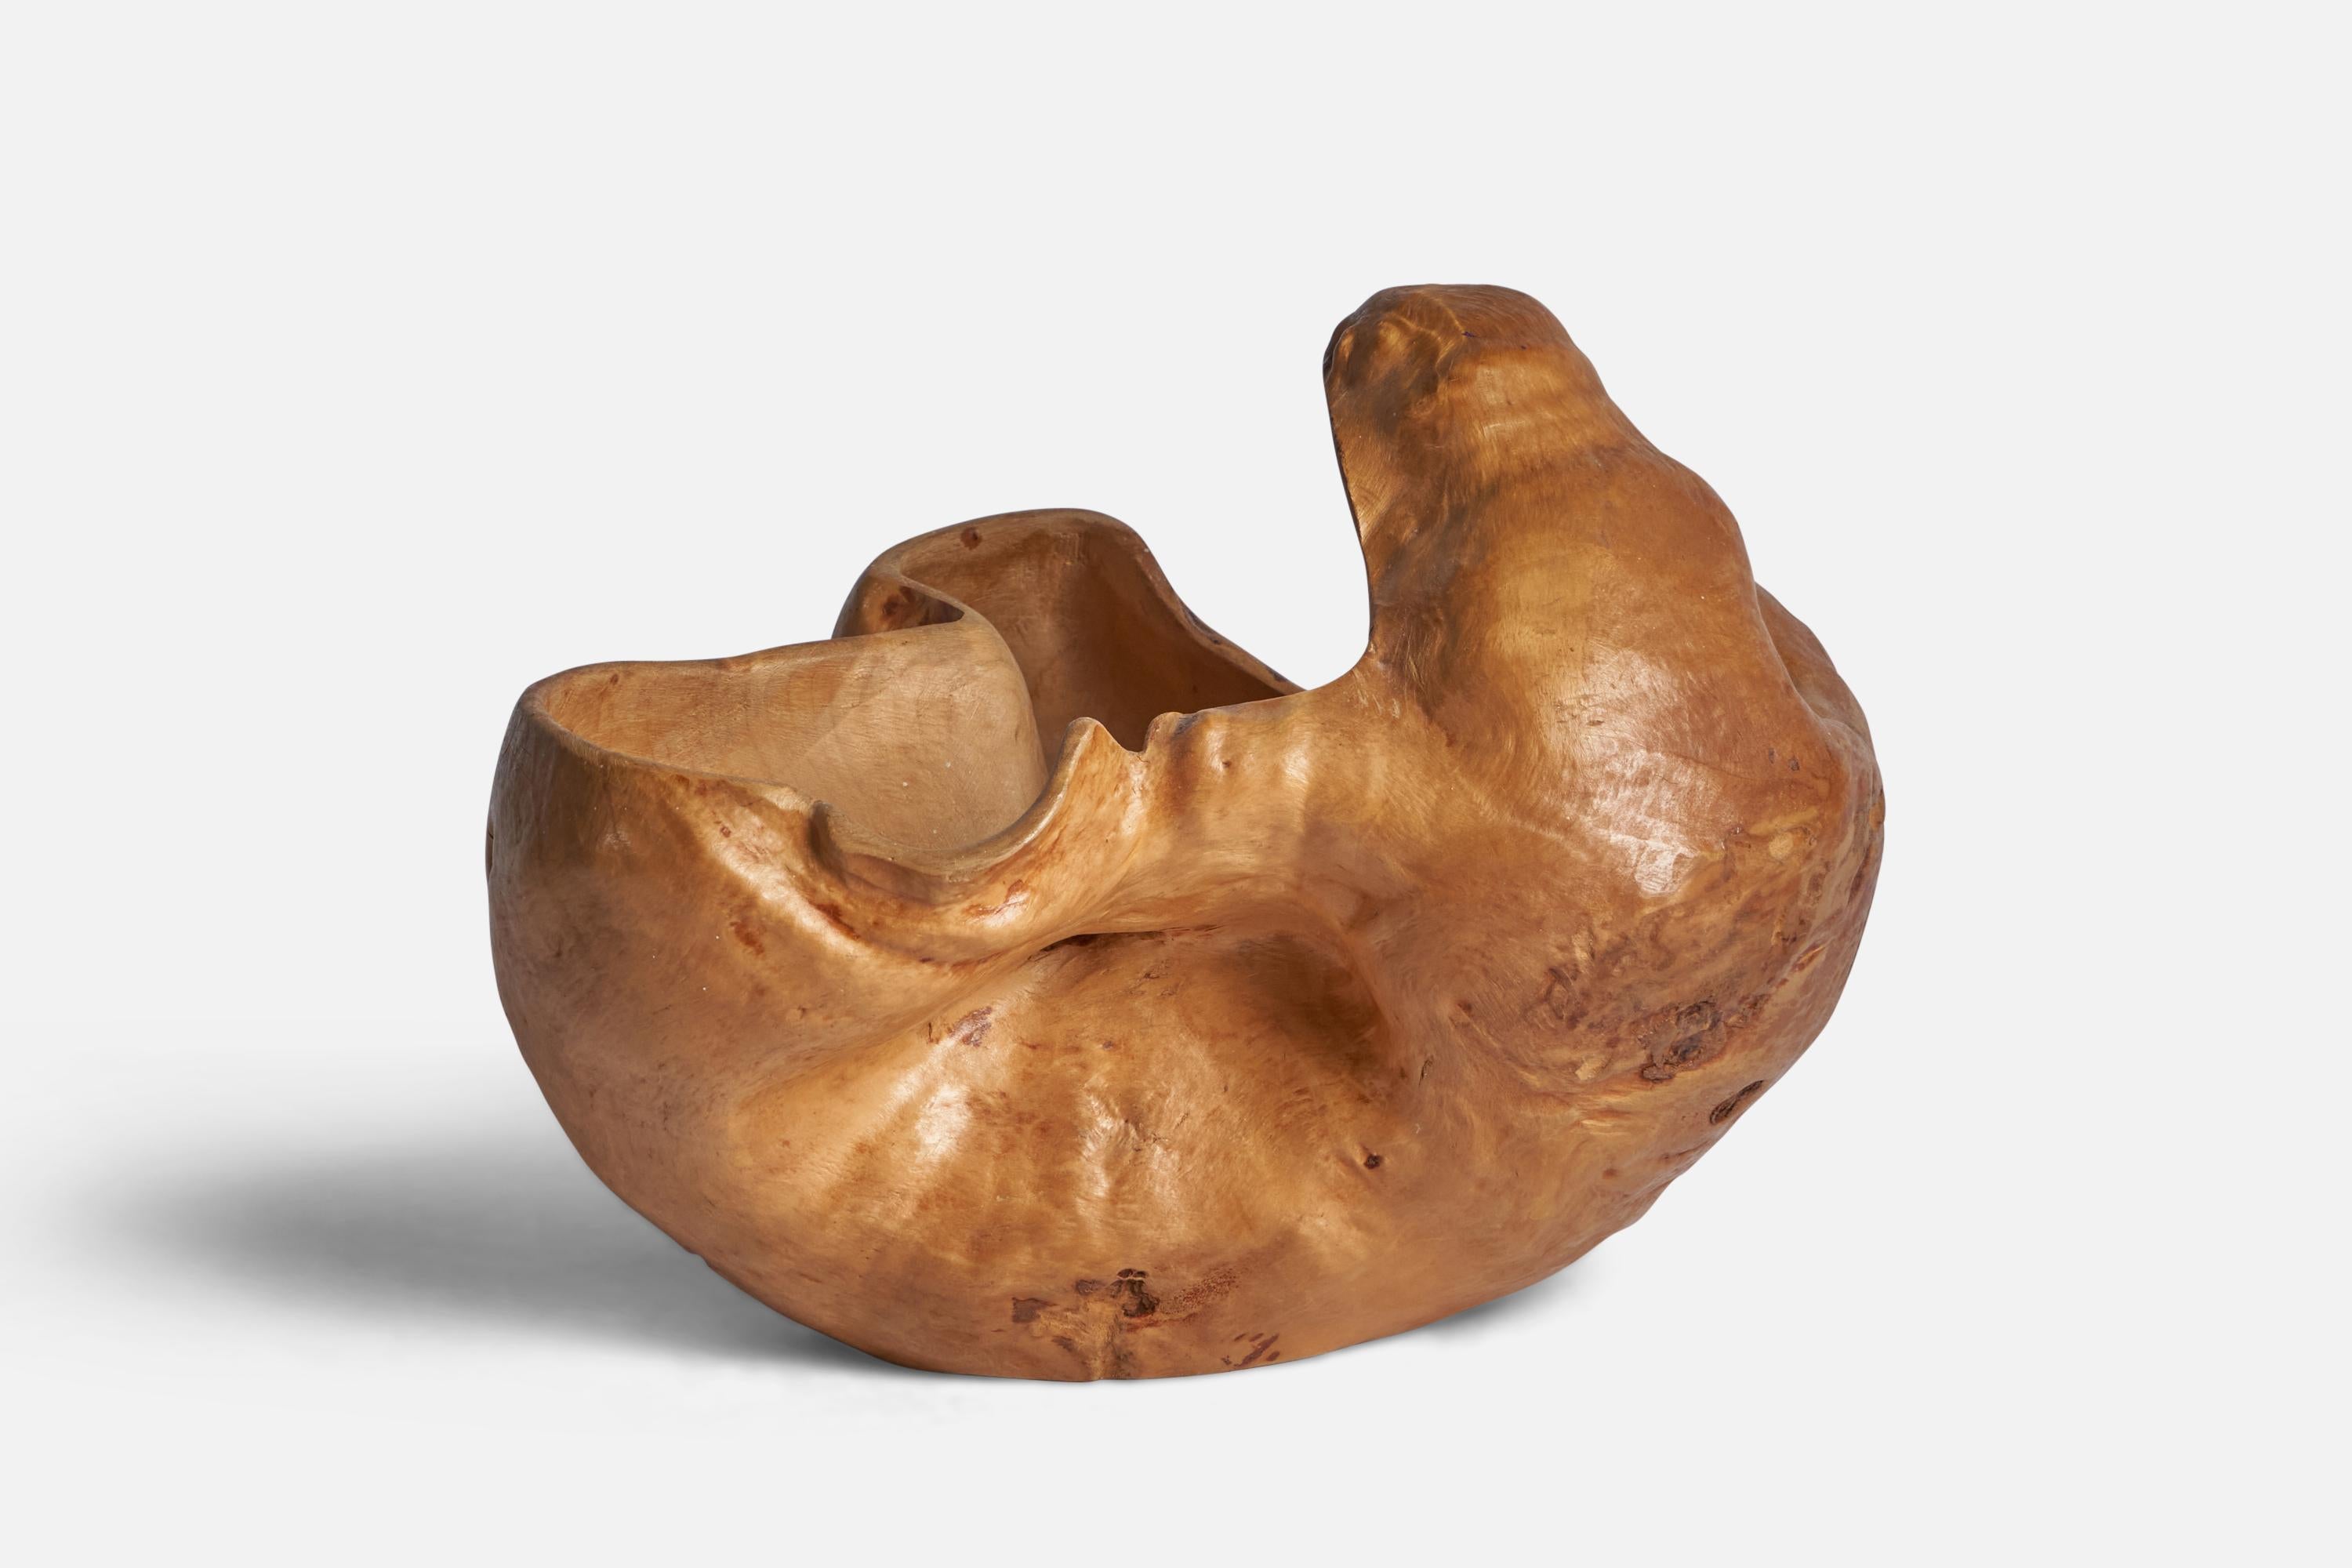 A burl wood bowl designed and produced in Sweden, 1975.